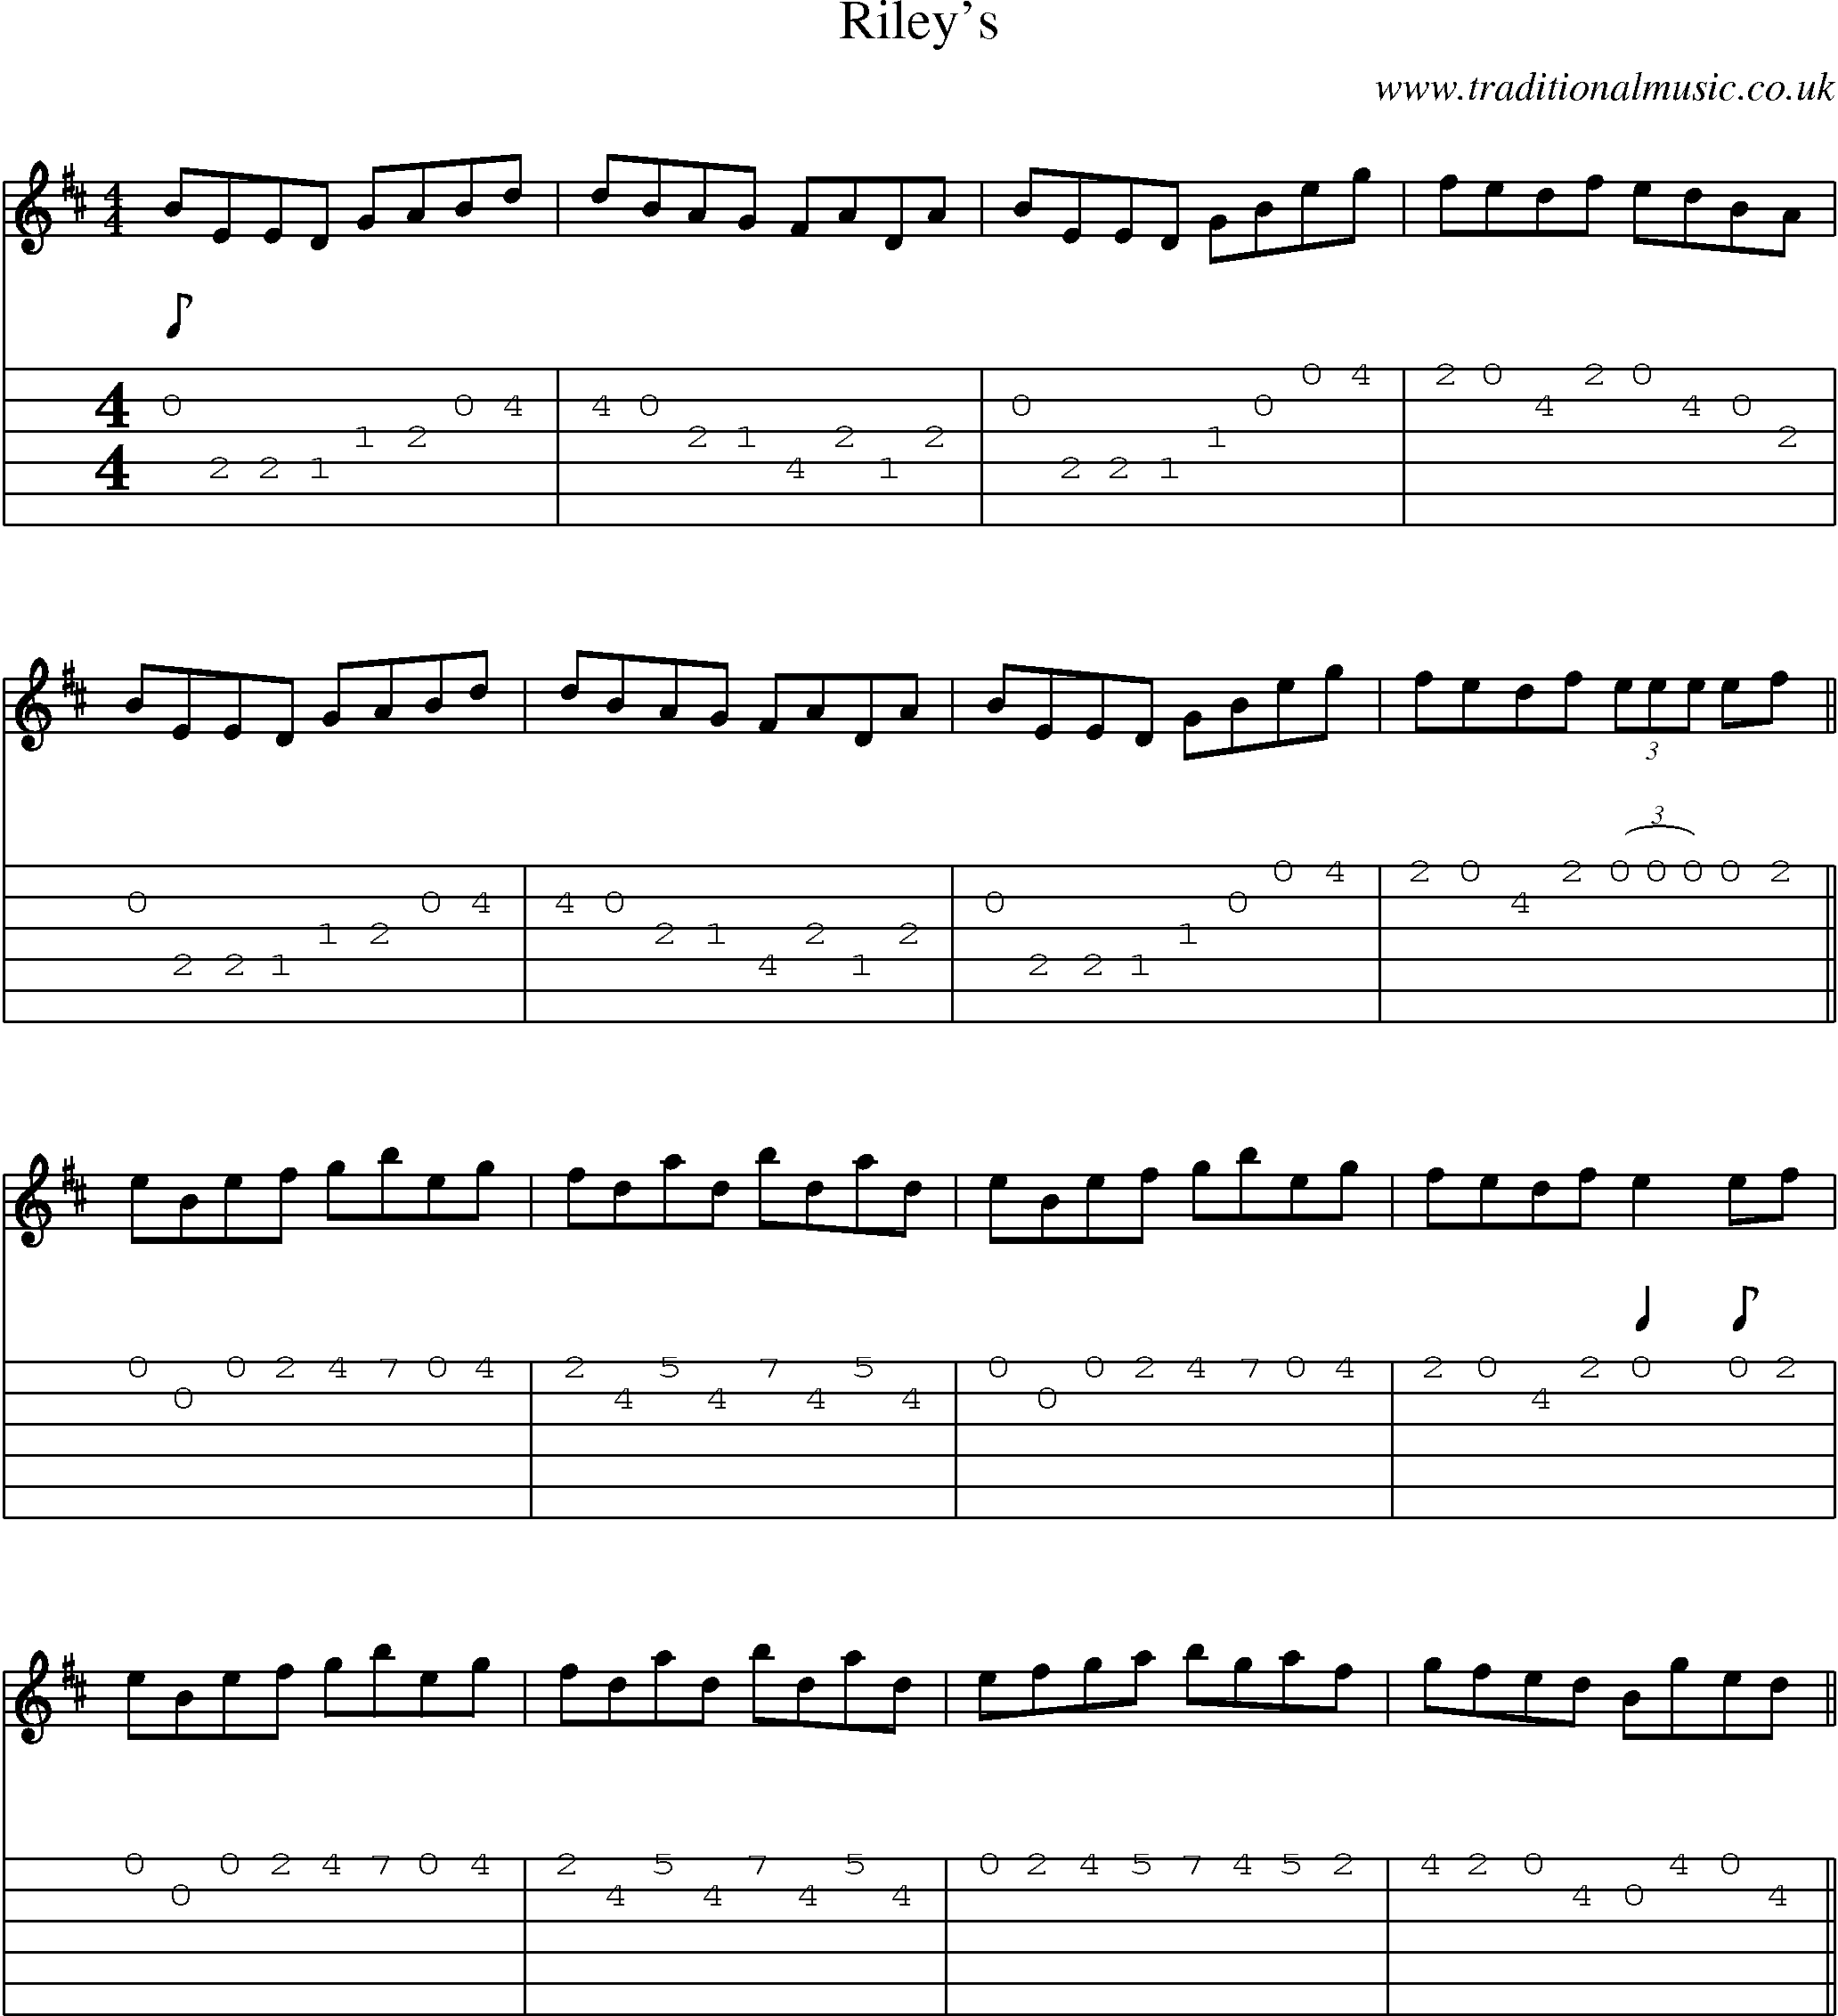 Music Score and Guitar Tabs for Rileys